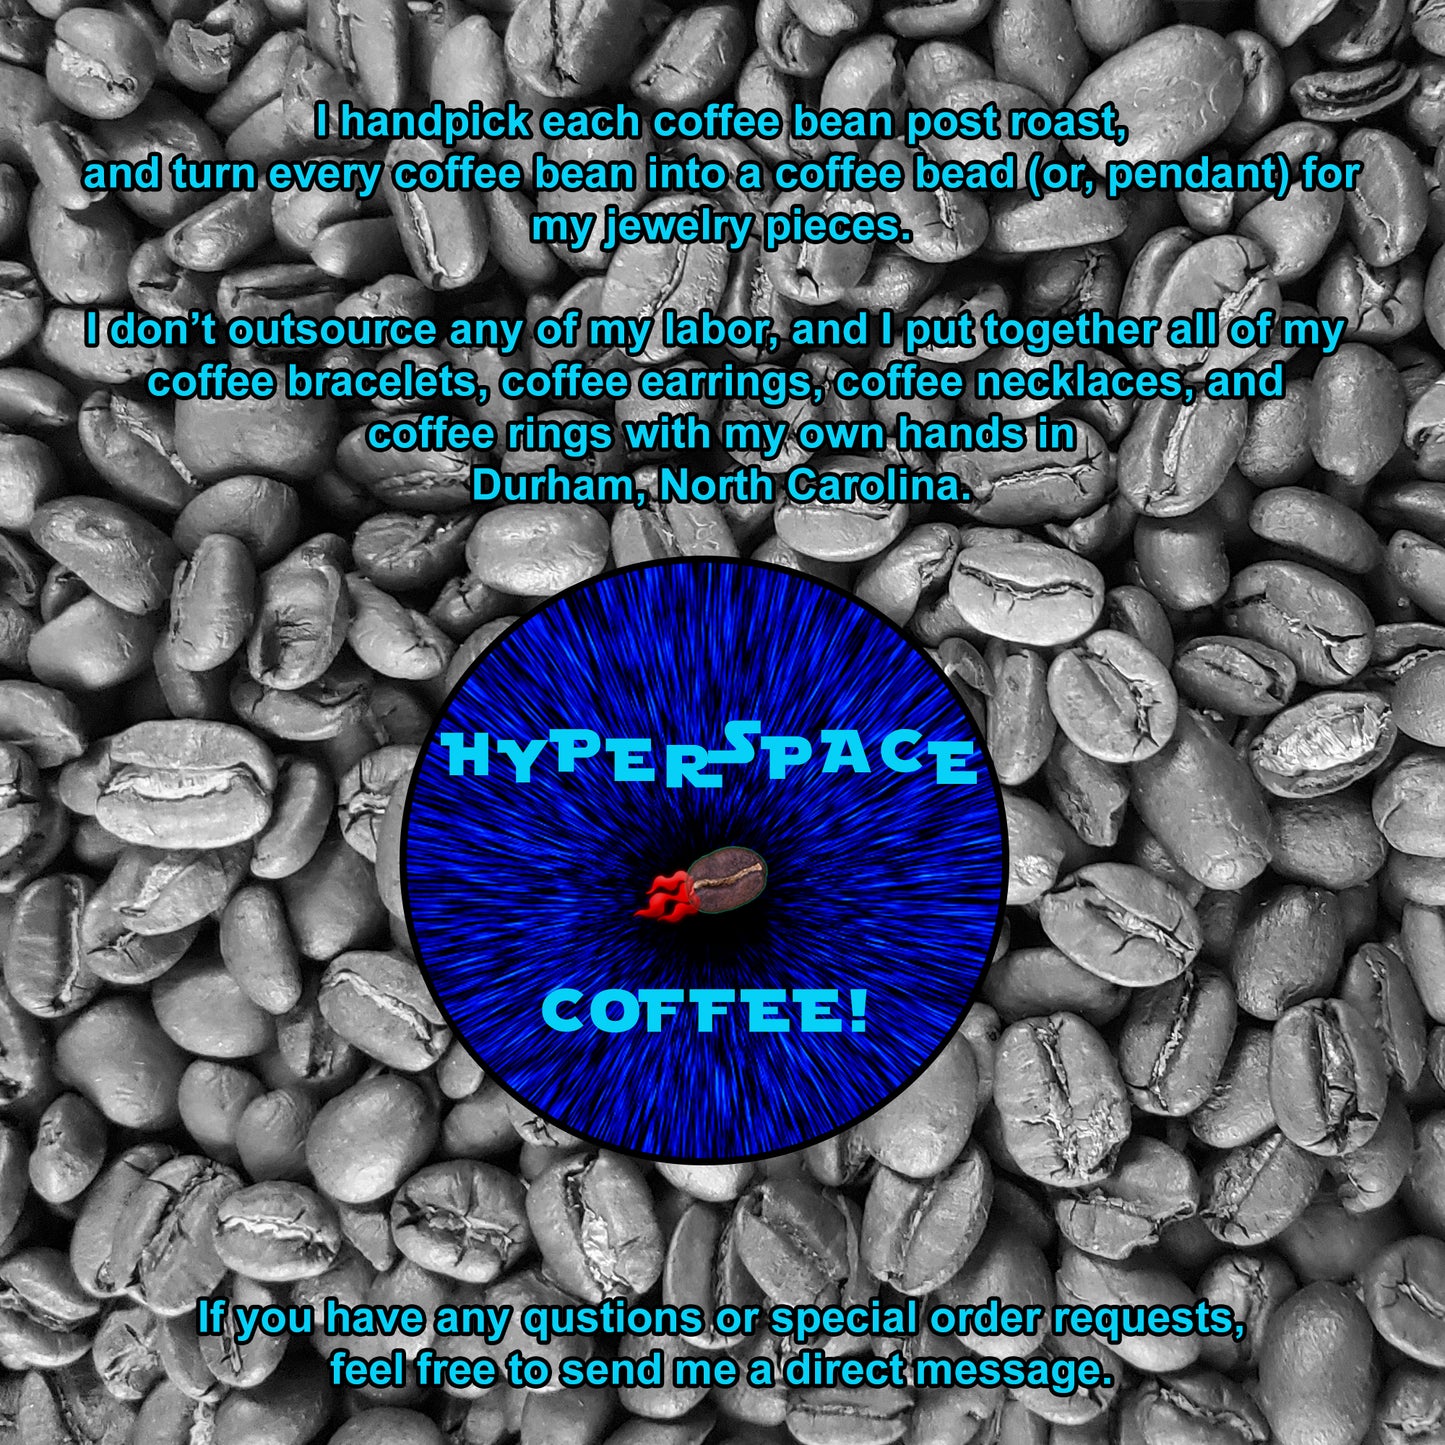 Hyperspace Coffee Bracelets Bundle Discount - Get a One Way Facing & Paired Facing Real Coffee Bean Bracelet - Handmade in U.S.A.